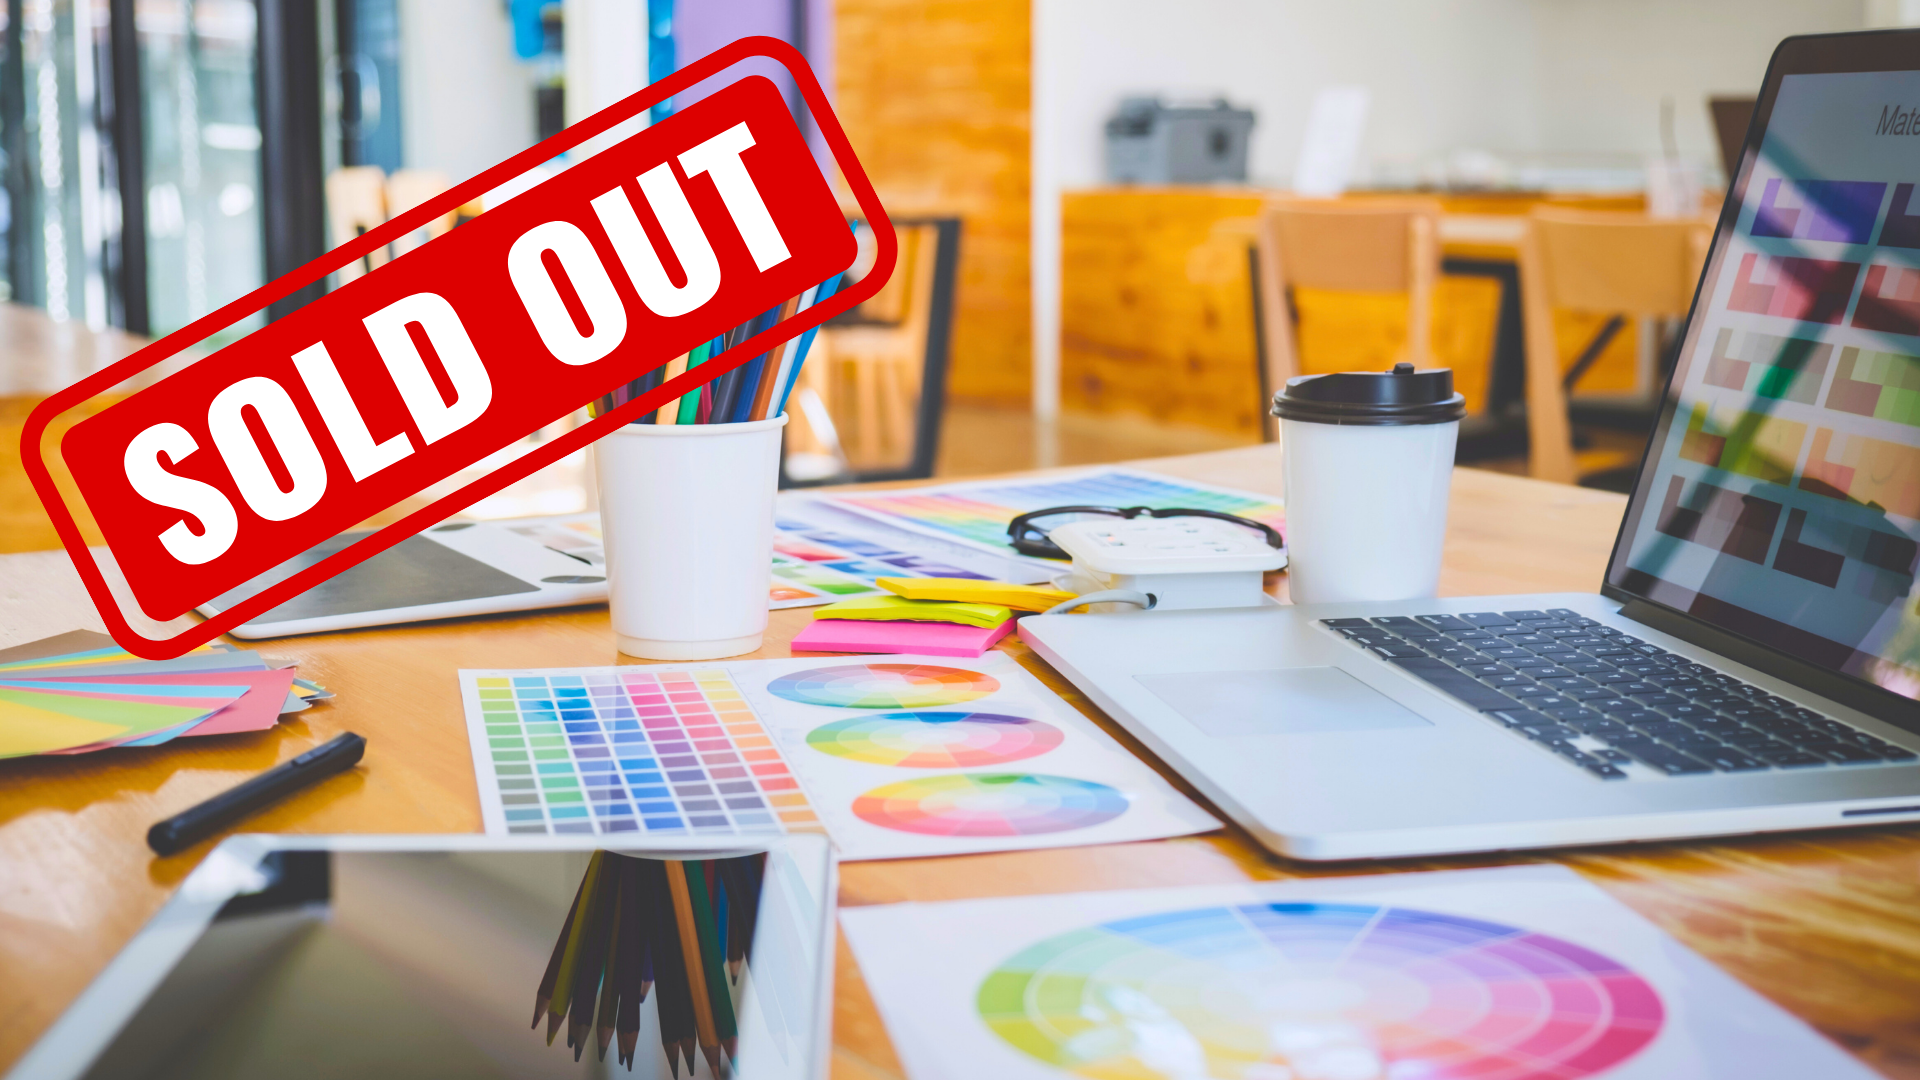 Design for young entrepreneurs class is sold out.